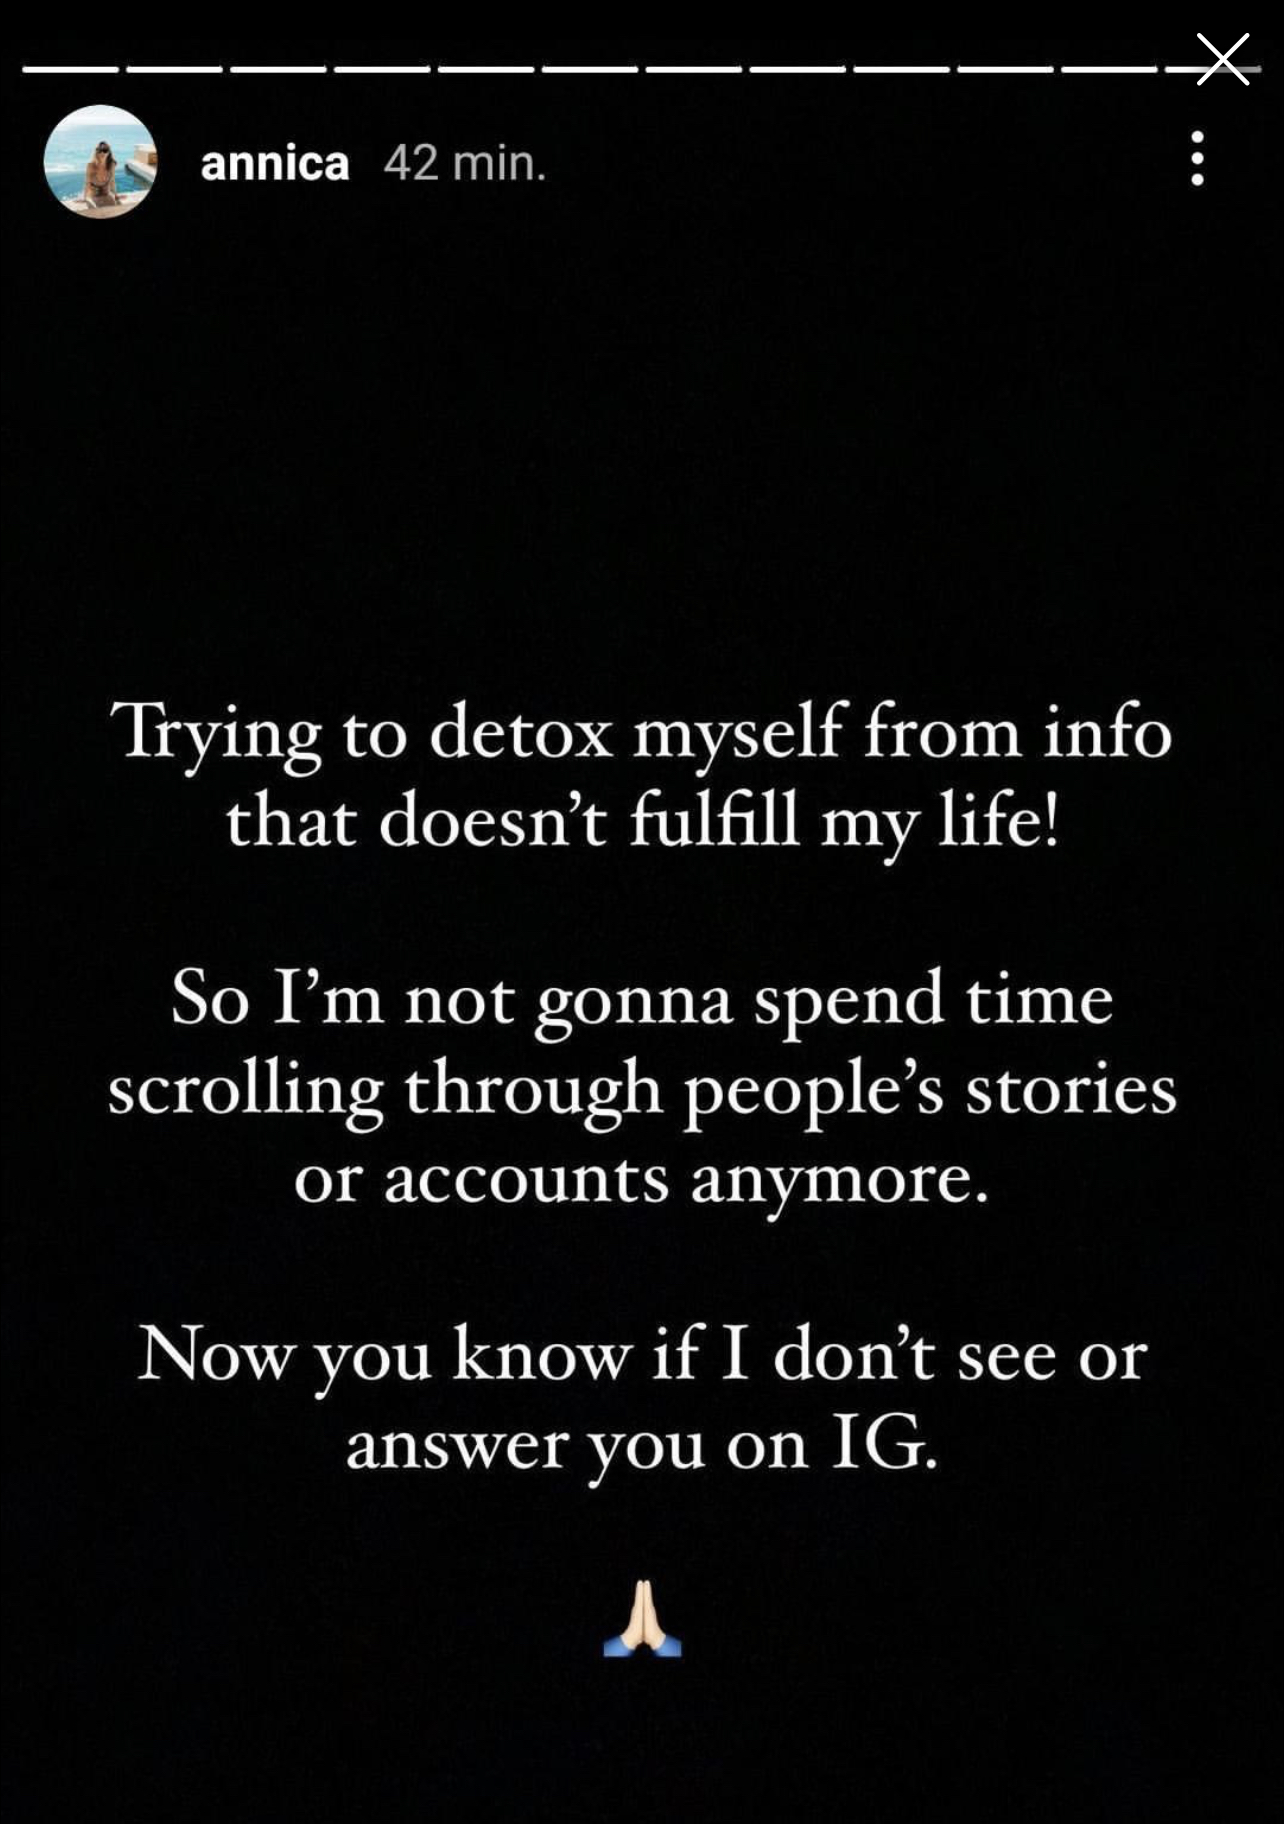 Annica: Trying to detox myself from info that doesn't fulfill my life! Sp I'm not gonna spend time scrolling through people's stories or accounts anymore. Now you know if I don't see or answer you on IG.